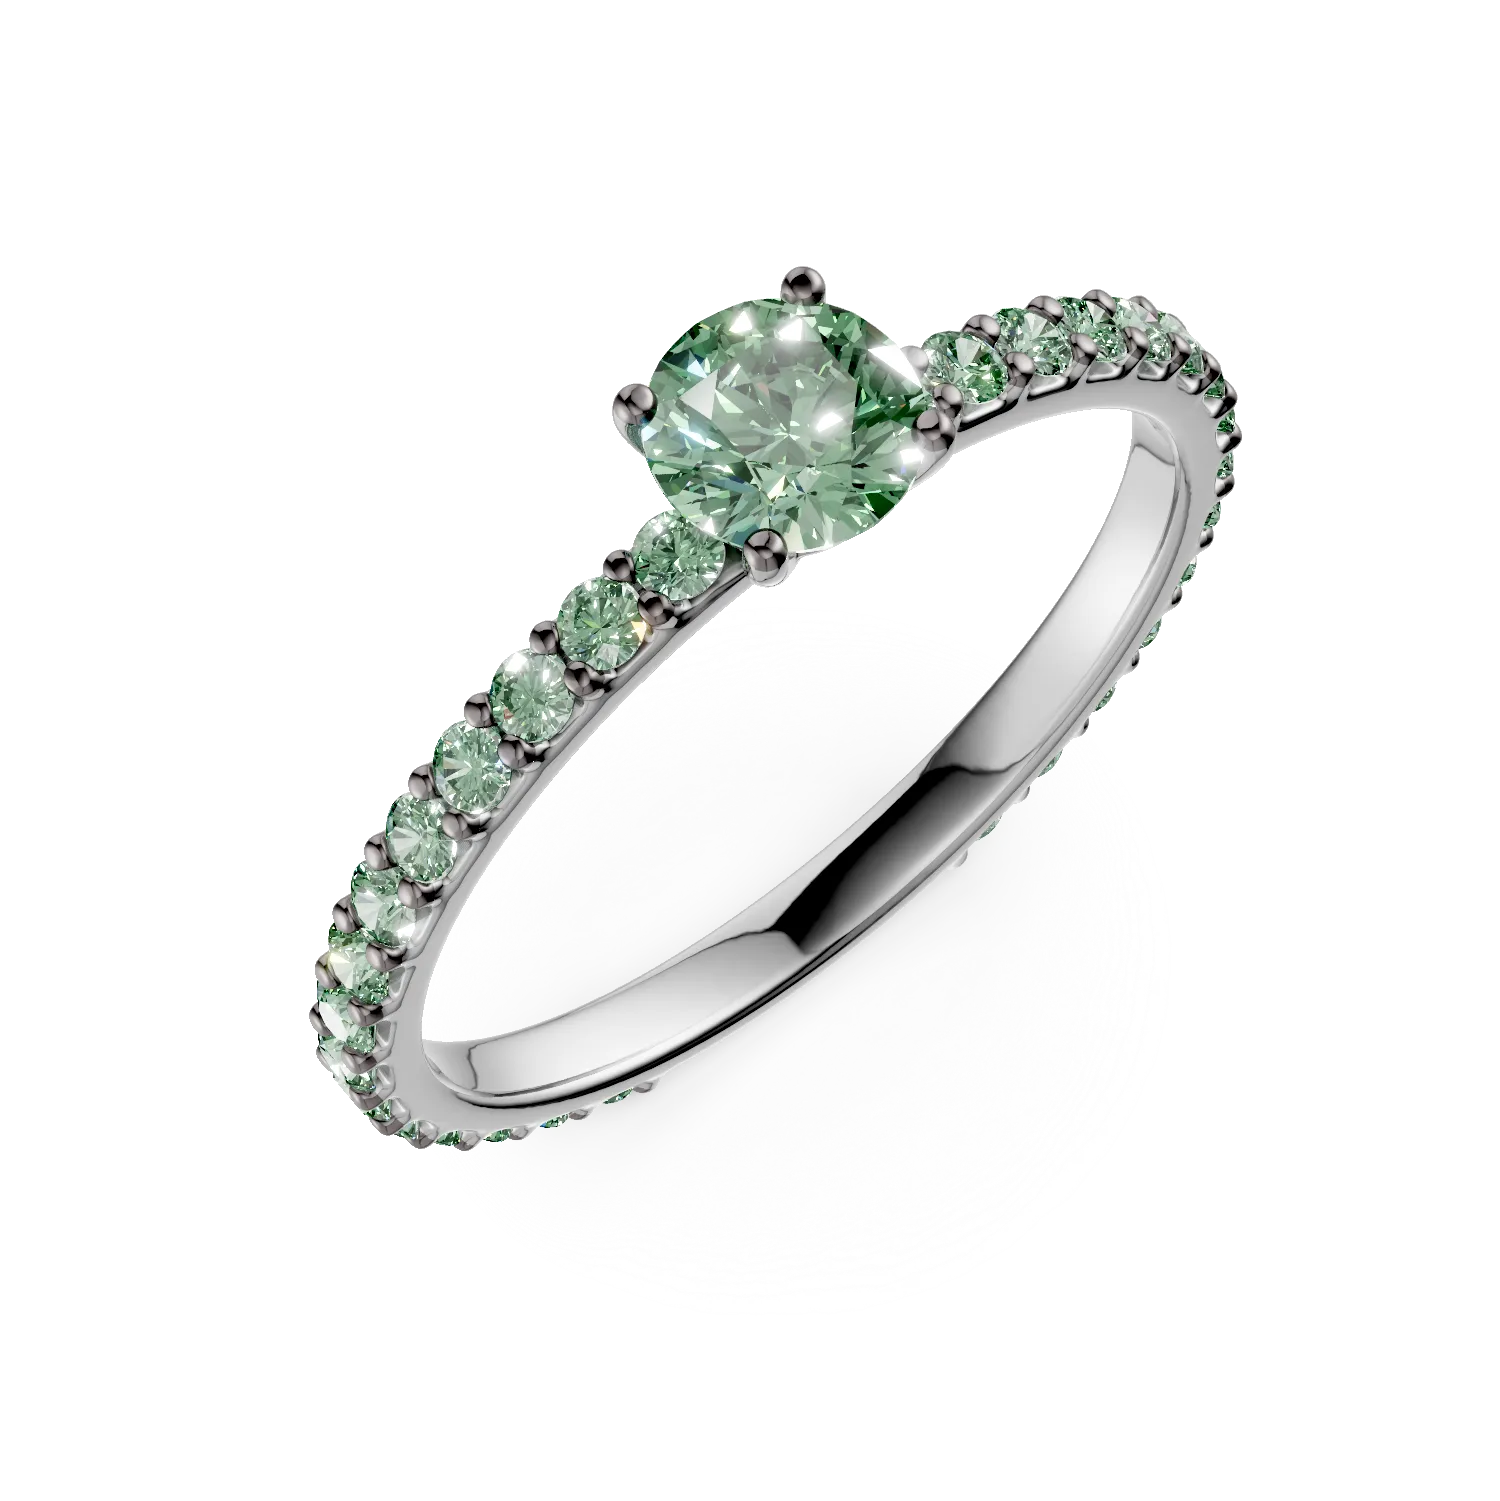 White gold engagement ring with 0.83ct emeralds